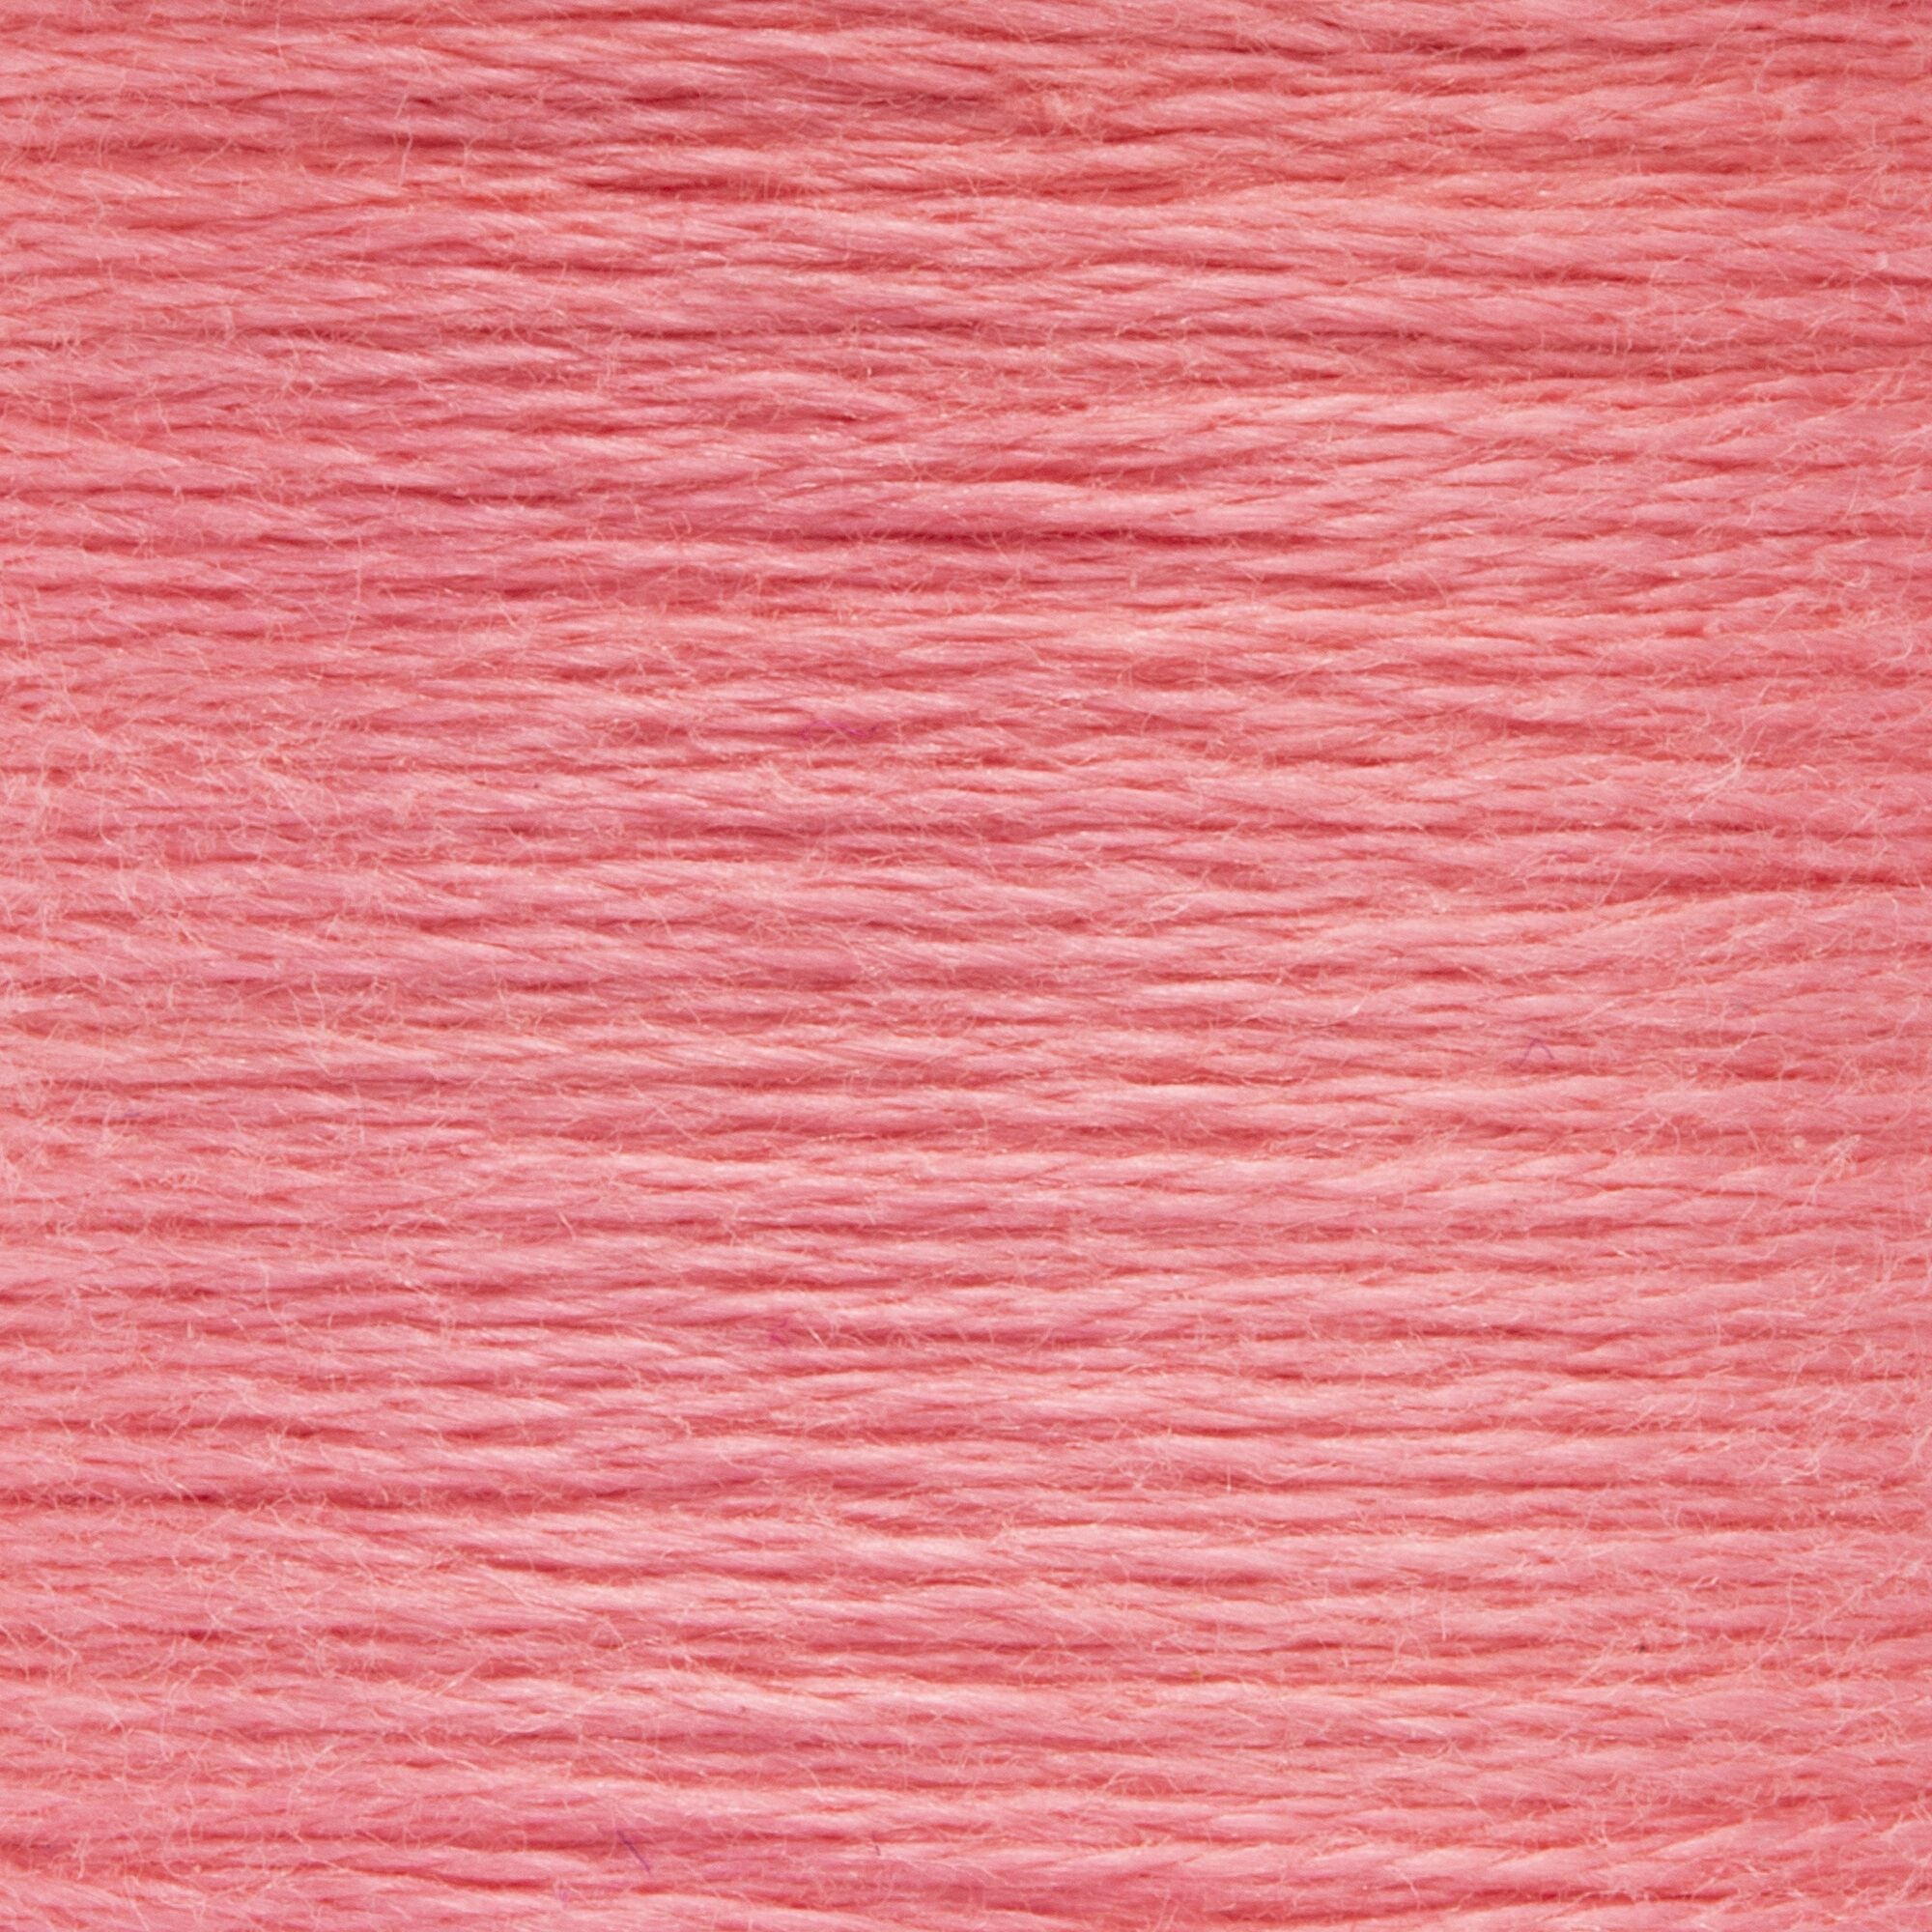 Anchor Embroidery Floss in Blush Lt